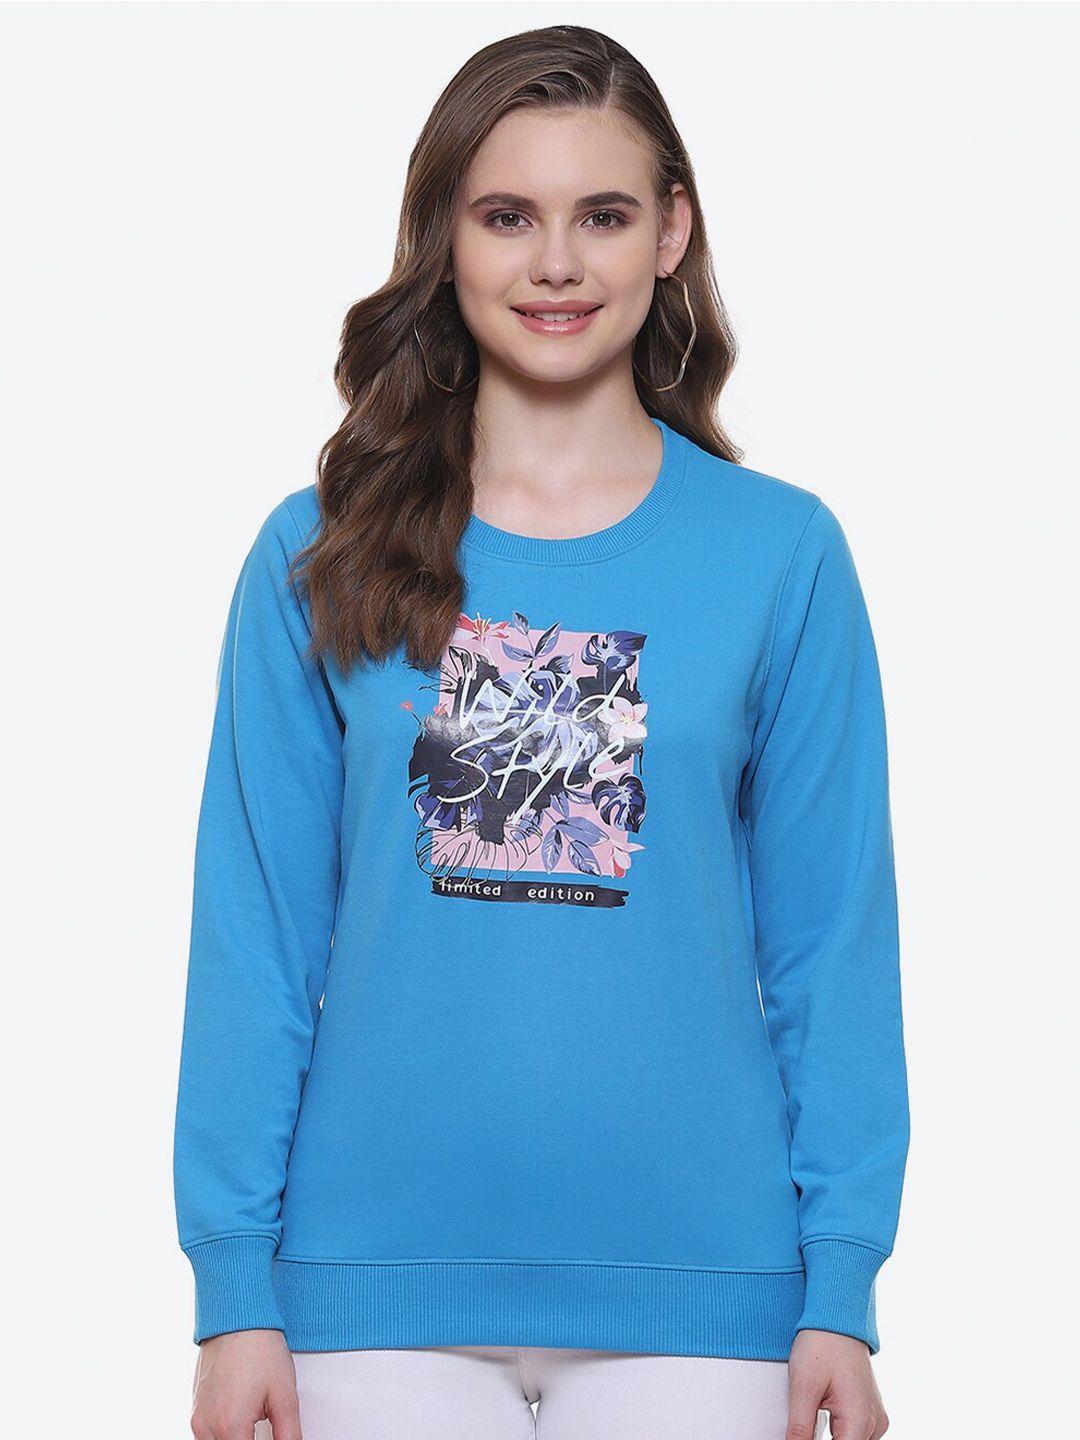 2bme-floral-printed-round-neck-long-sleeve-cotton-pullover-sweatshirt